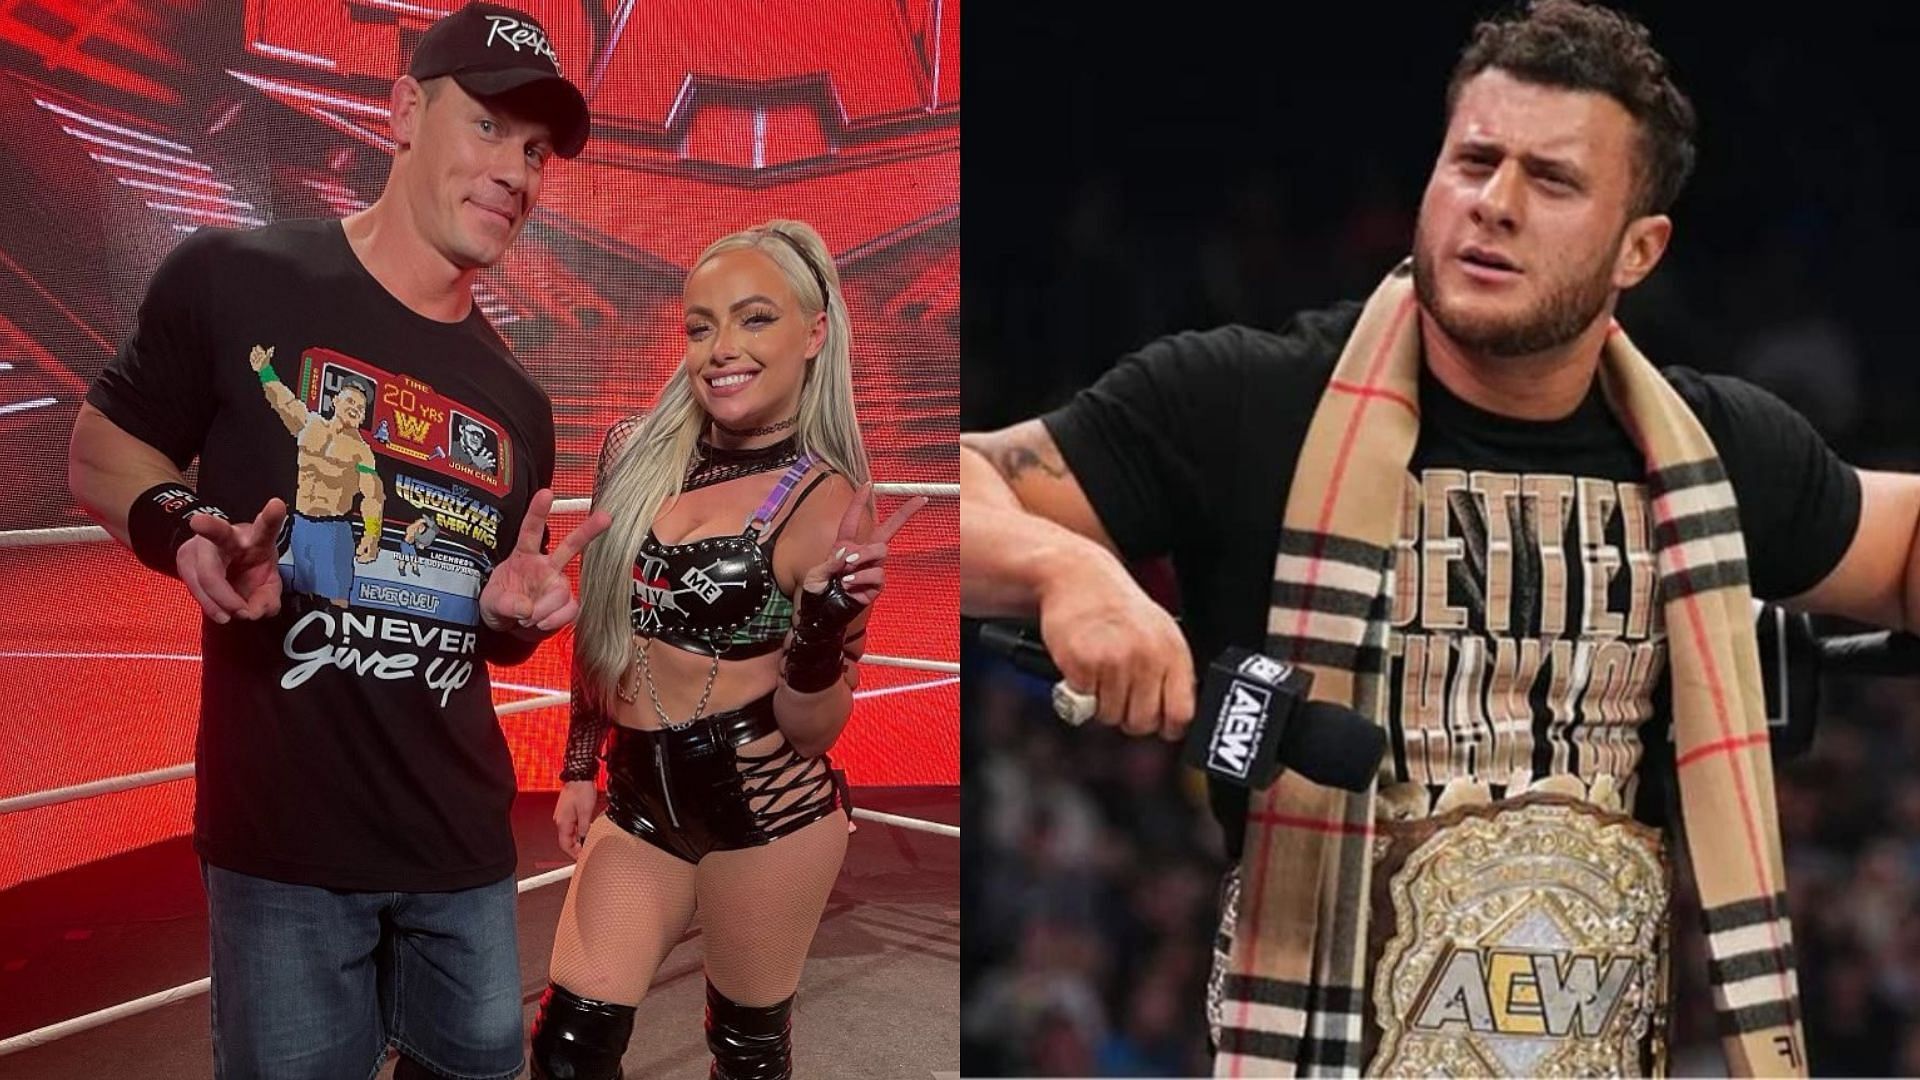 Liv Morgan was seen alongside some top names from the wrestling world